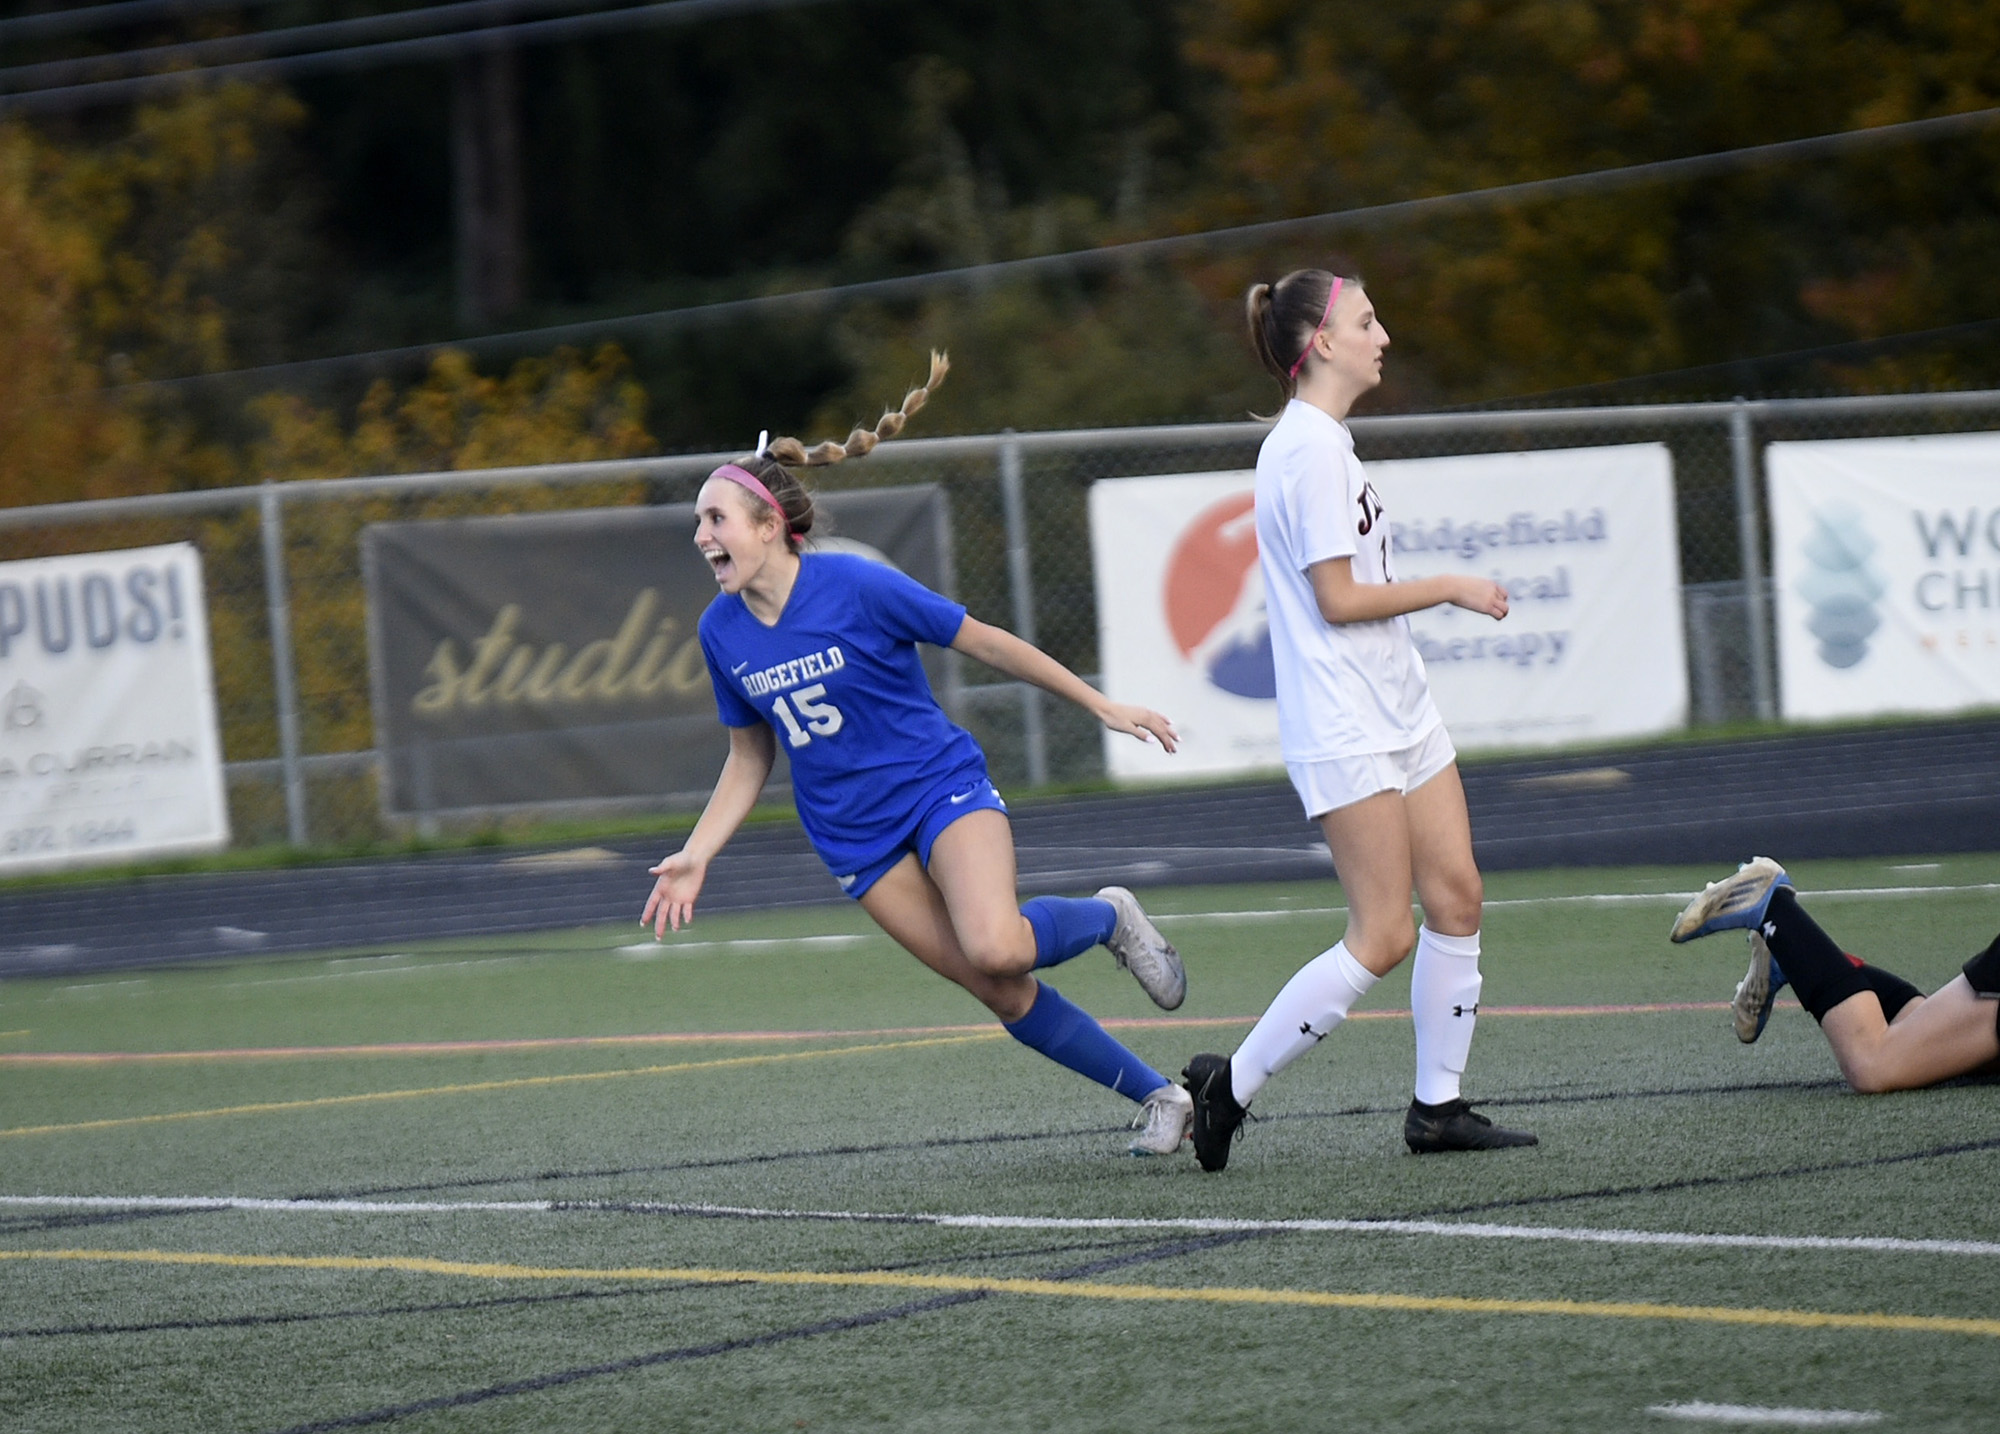 Ridgefield junior Tori Lasch celebrates after scoring a goal in the Spudders’ 3-0 win over R.A. Long in the Class 2A girls soccer district championship game at Ridgefield High School on Saturday, Nov. 4, 2023.